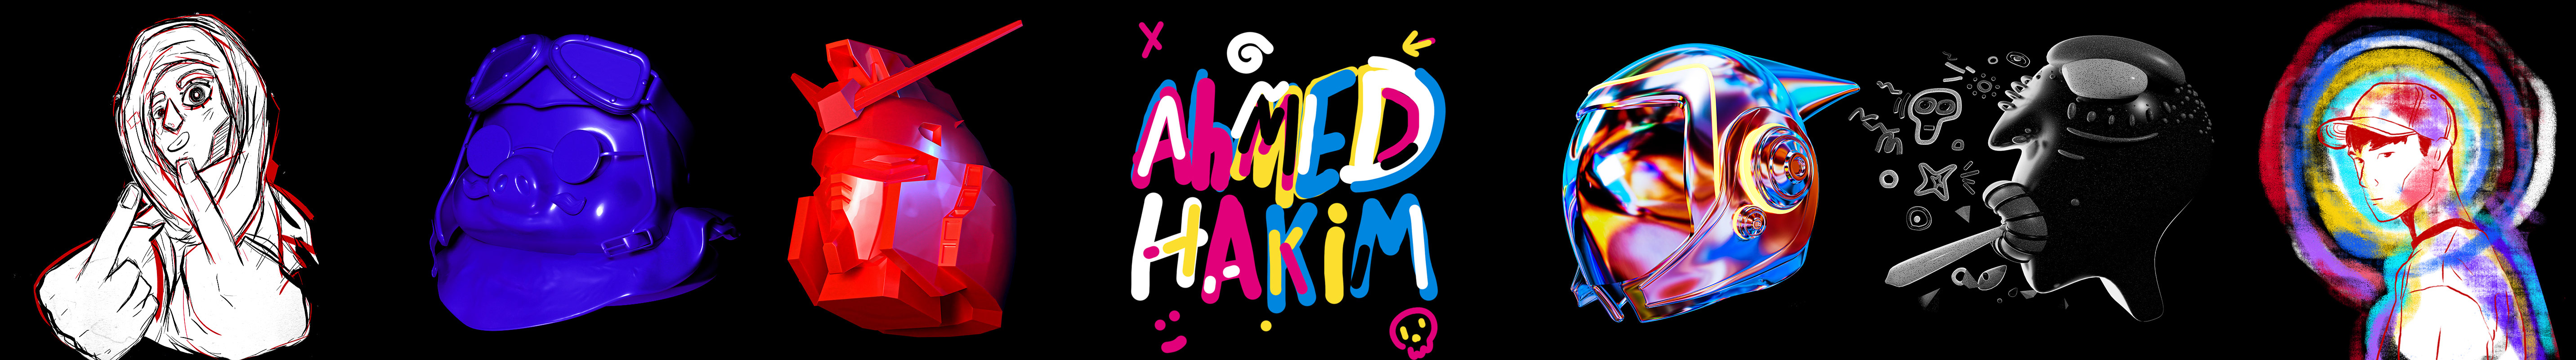 Ahmed Hakims profilbanner